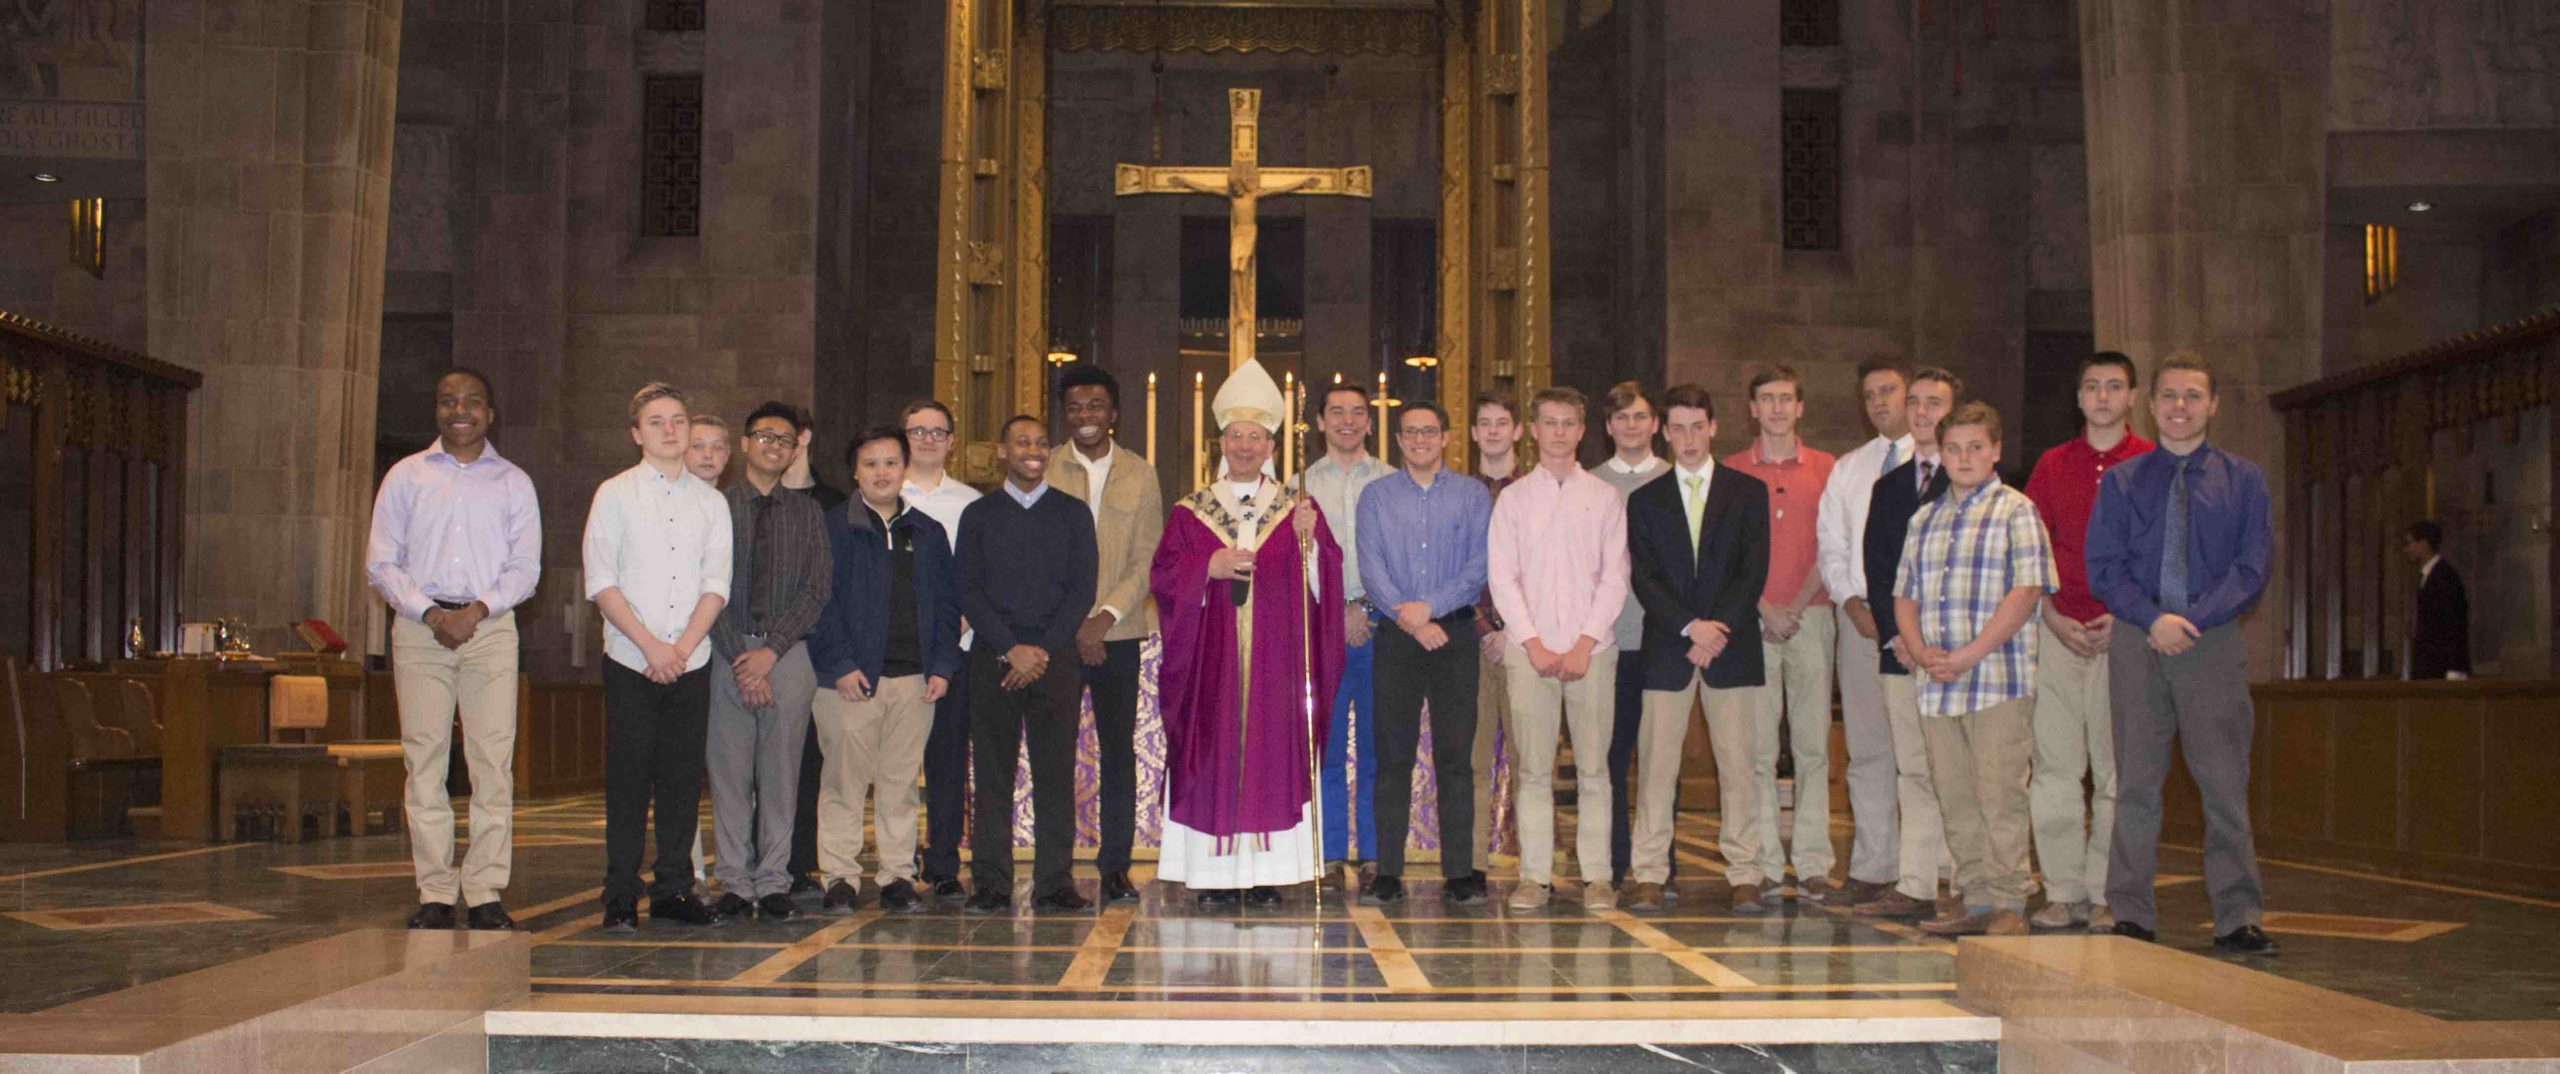 Altar servers, sacristans honored with inaugural Monsignor Valenzano Service Awards